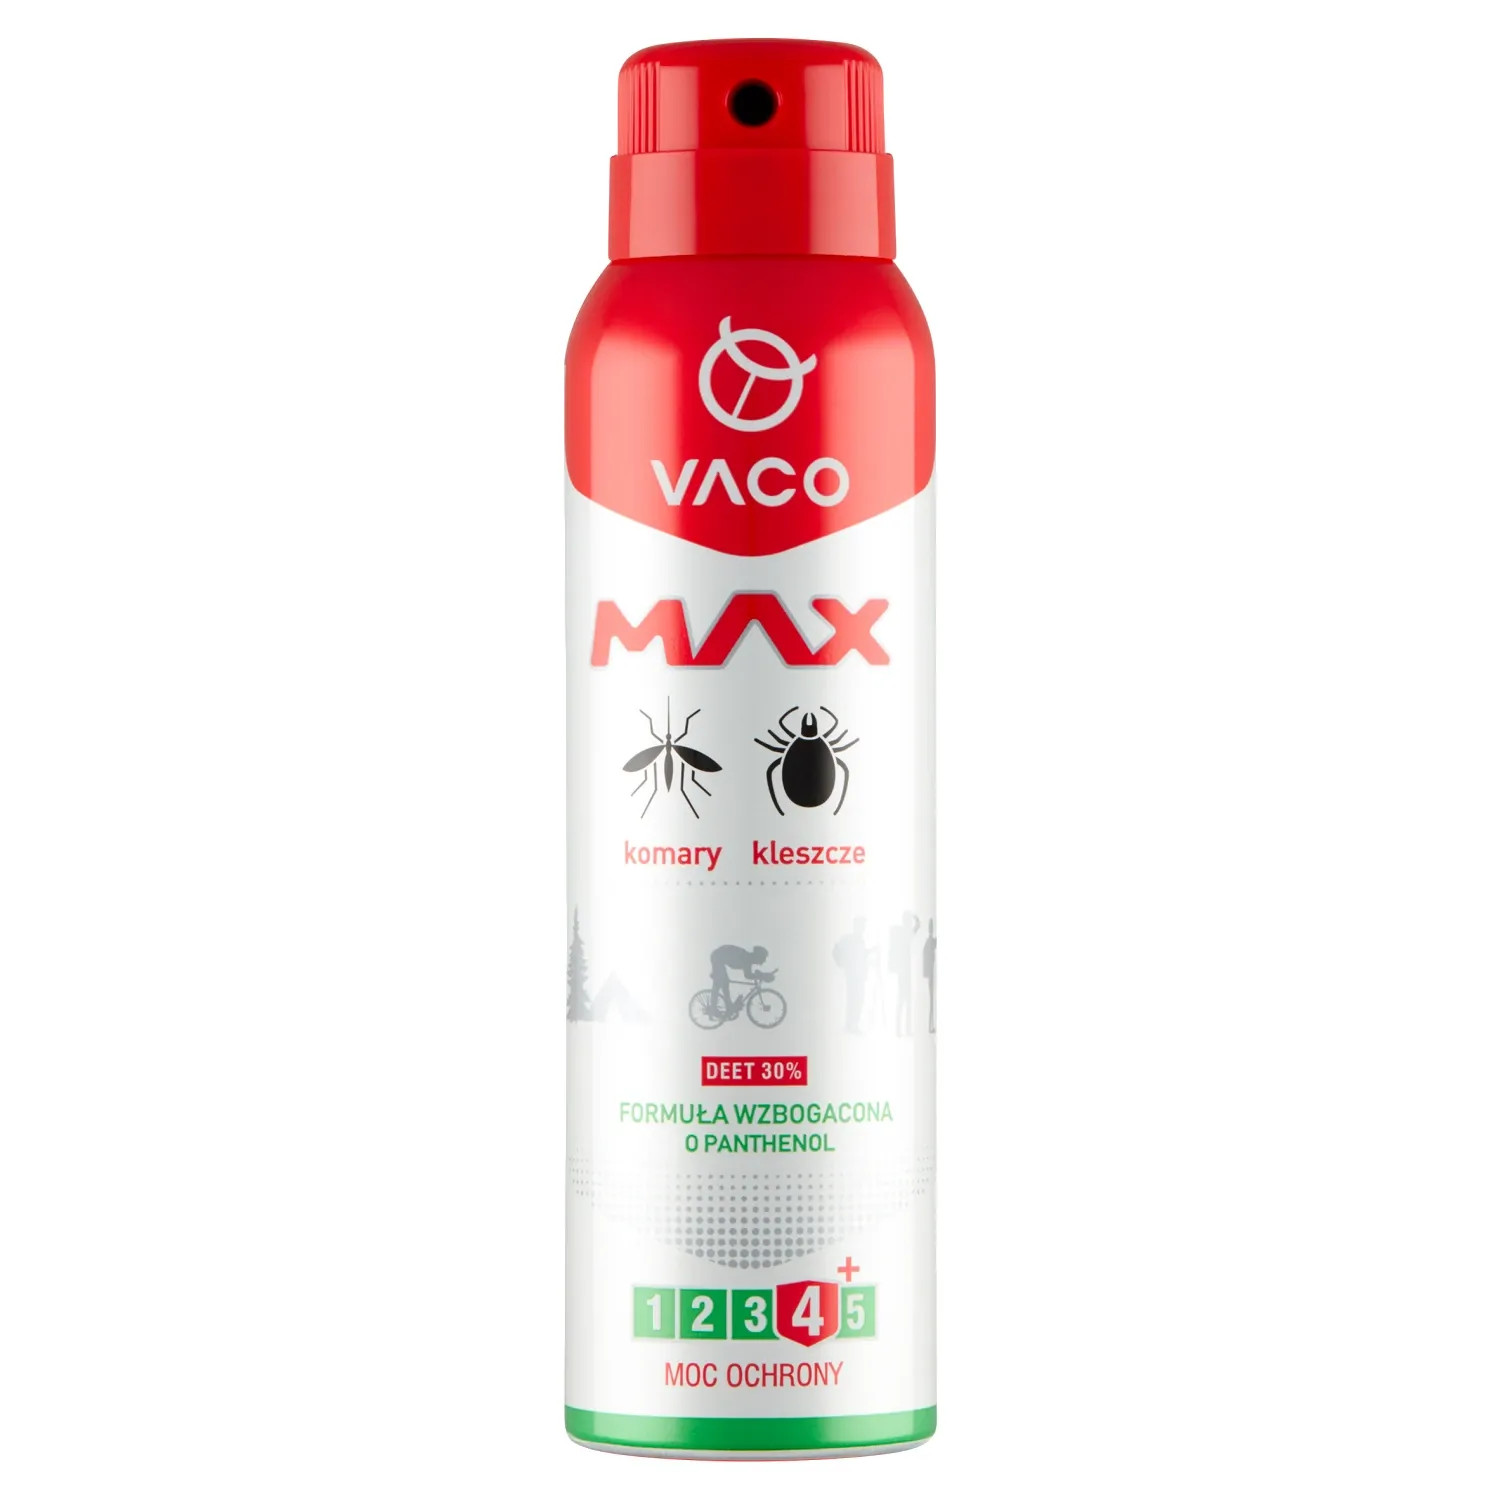 VACO Spray MAX for mosquitoes, ticks, messes with PANTHENOL